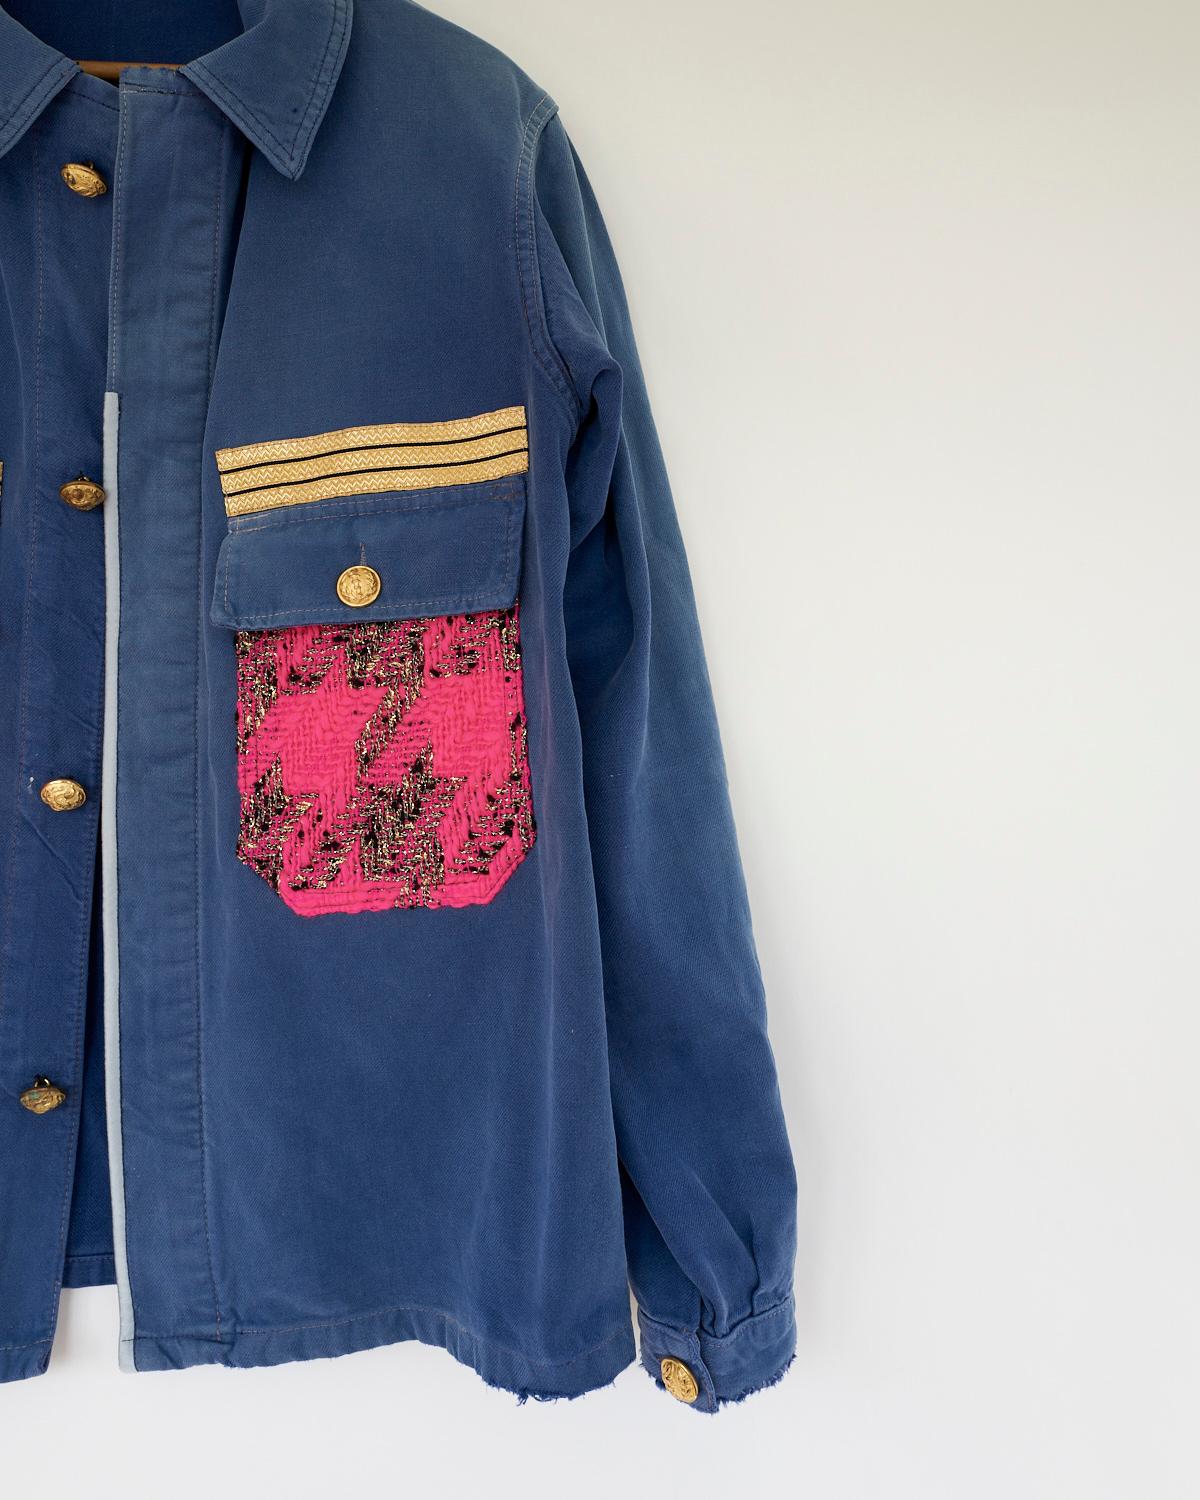 French Work Jacket Blue Upcycled Gold Bottons Neon Pink Tweed J Dauphin

Our Up-cycled Vintage Jackets are made from vintage, natural fibers, military clothing and french workwear from the period 1940-1970. The trims we use comes from the finest